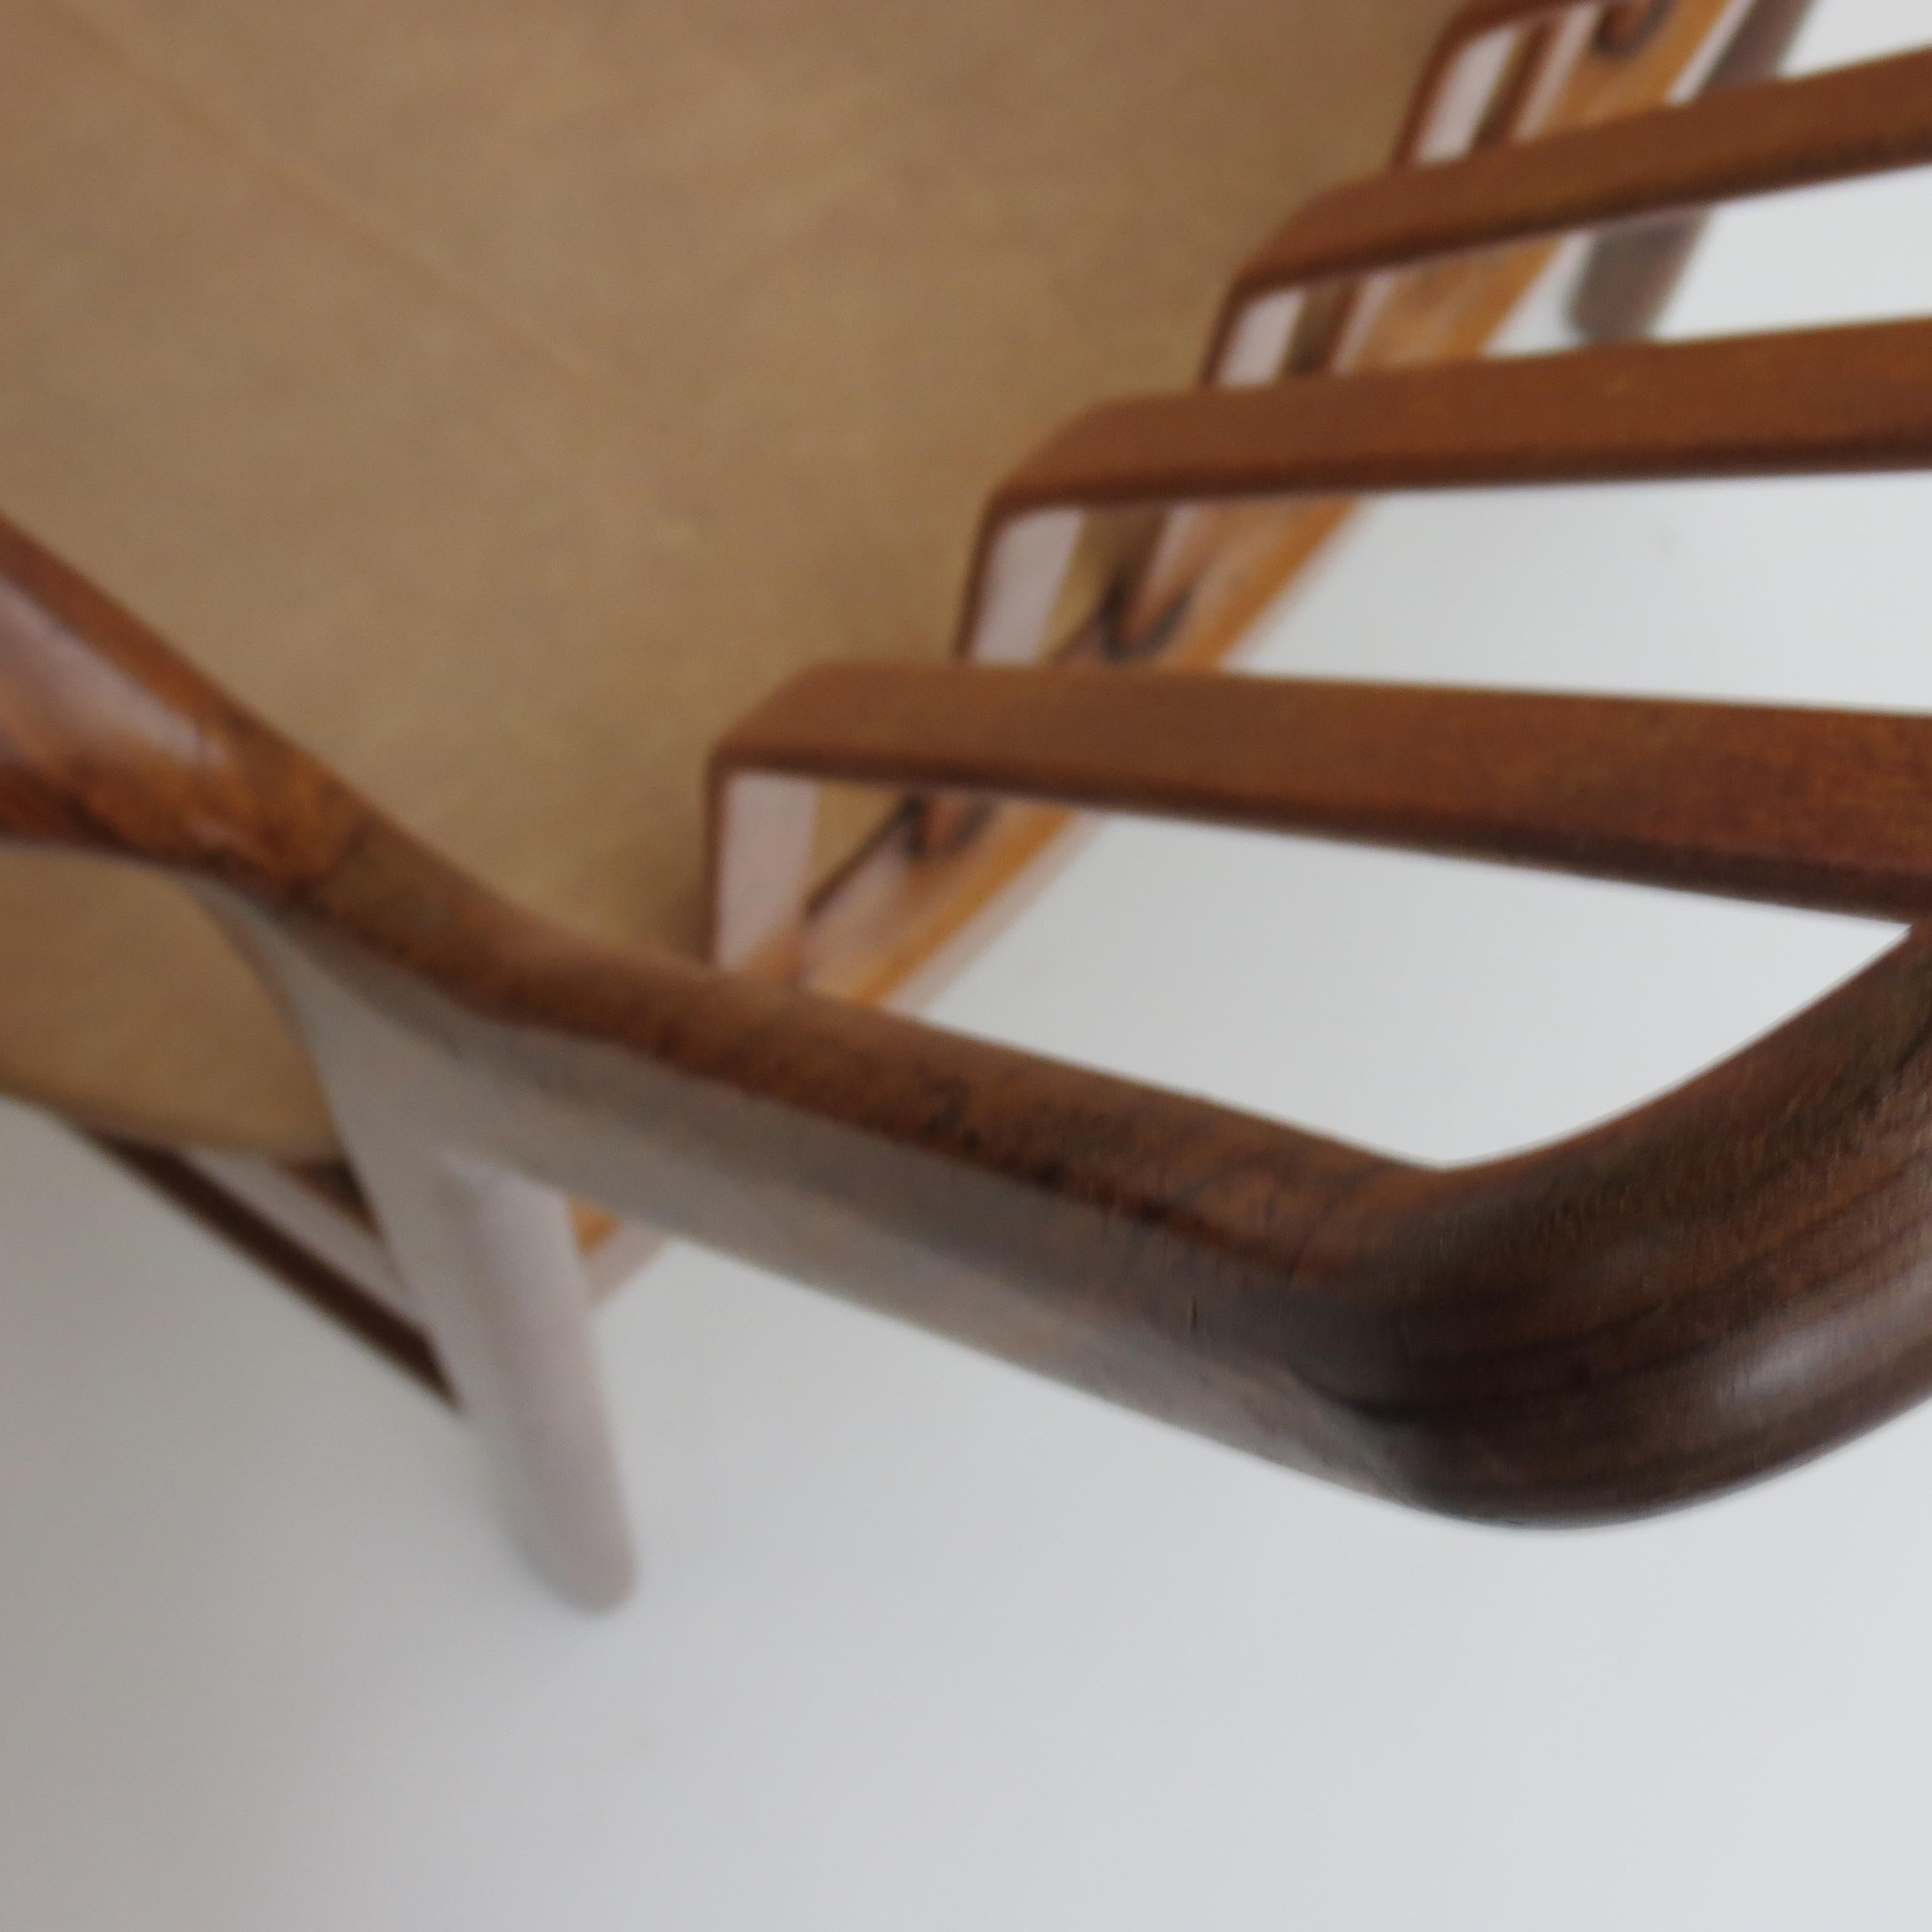 Midcentury Danish Chair by Svend Madsen 1960s with Brown Leather Seat 8